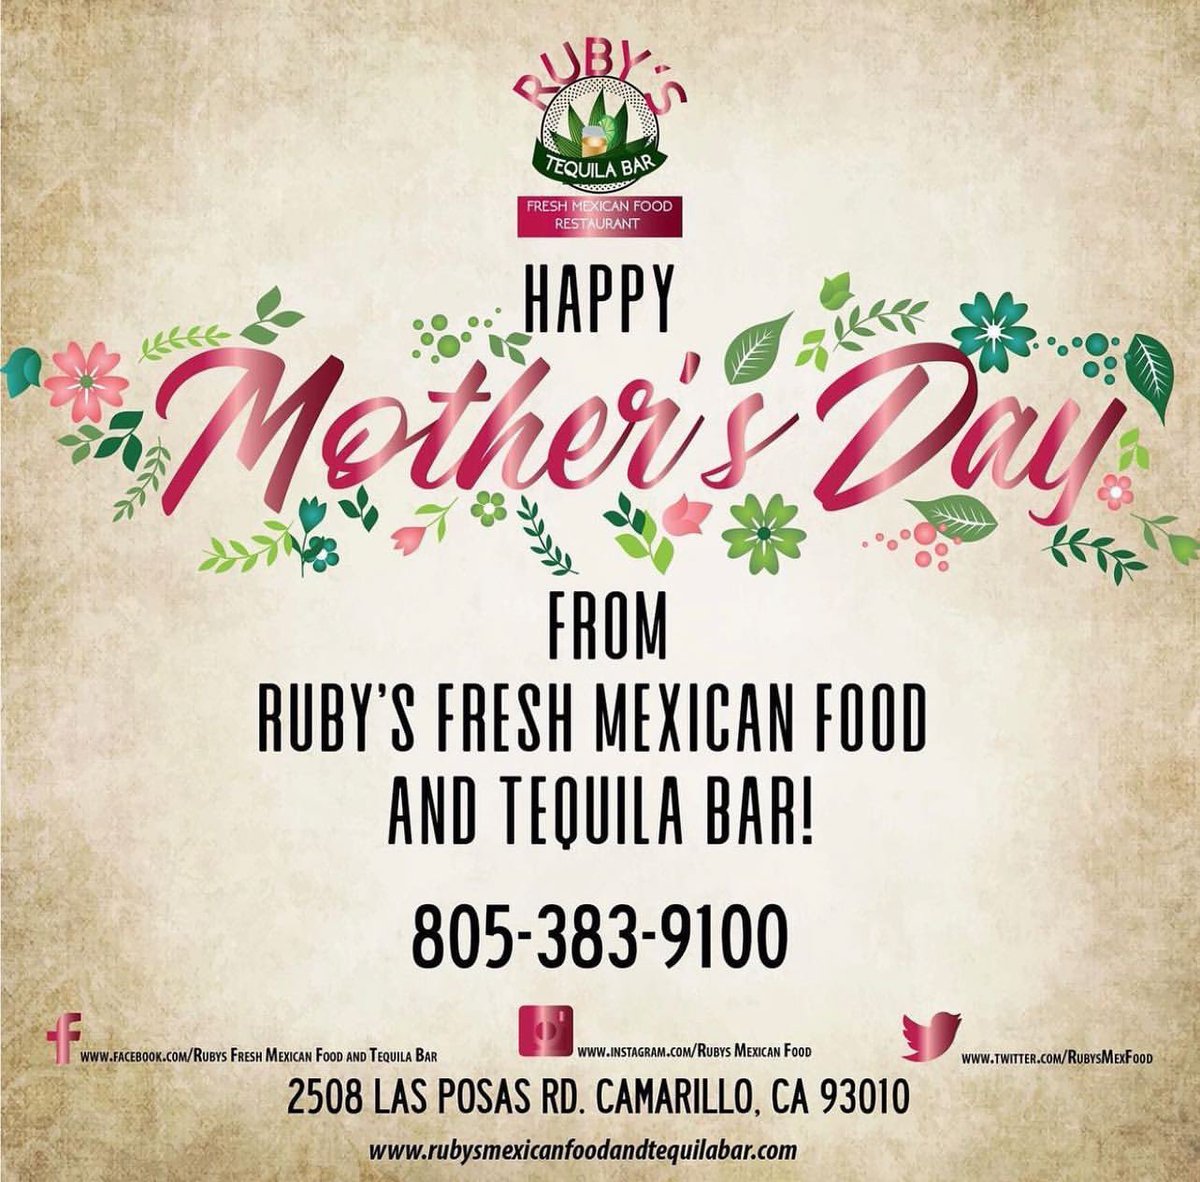 Happy Mother’s Day from Ruby’s!
Let us help you celebrate your #mom today with her favorite dishes and cocktails! 
#rubysfreshmexicanfoodandtequilabar 
#mothersday #diadelasmadres #sundaybrunch